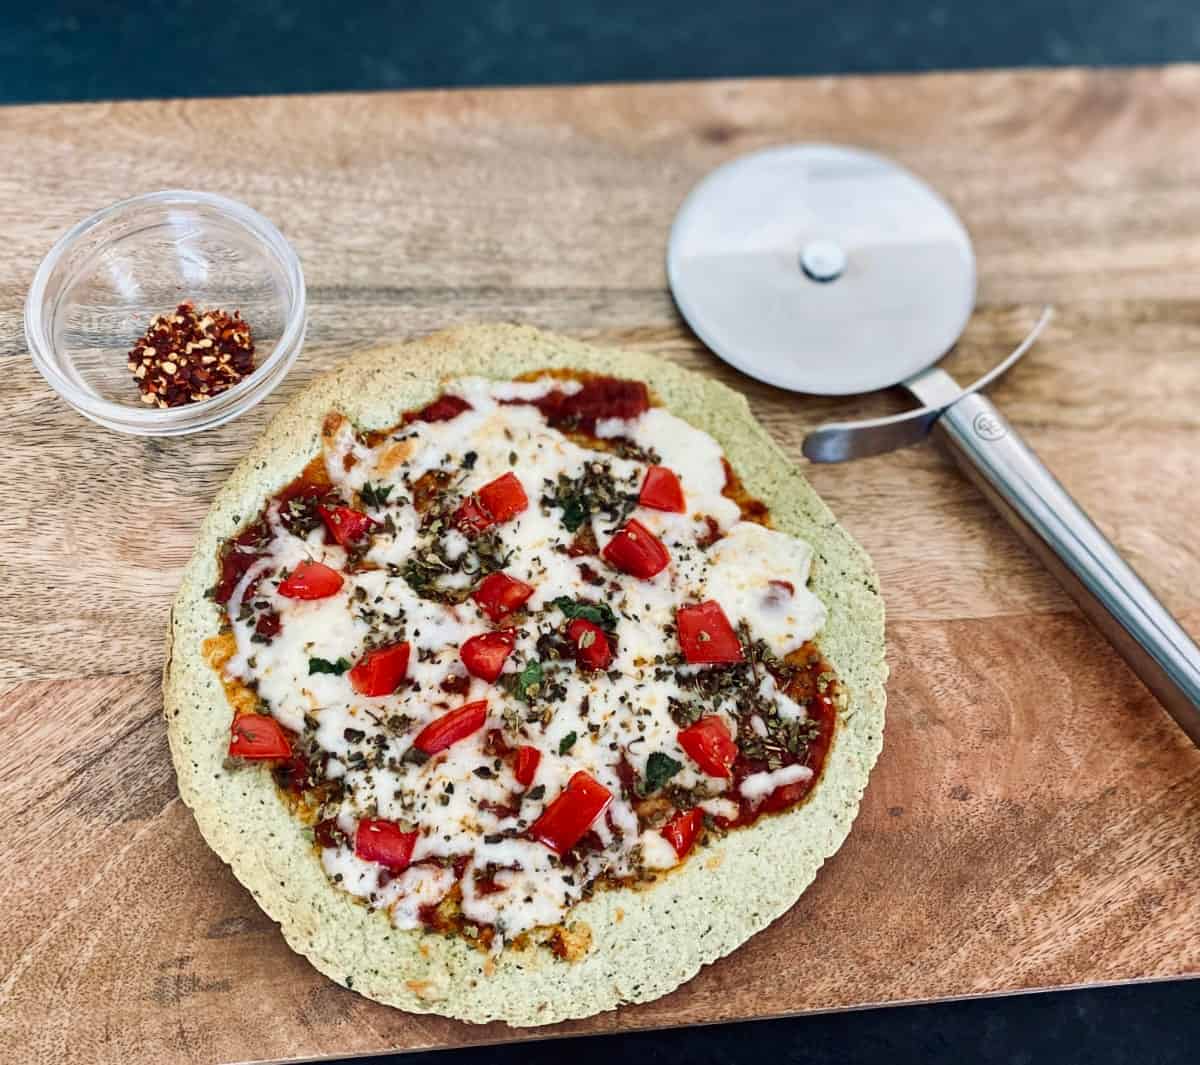 Baked tortilla pizza on wood cutting board with small bowl of red pepper flakes and pizza cutter.